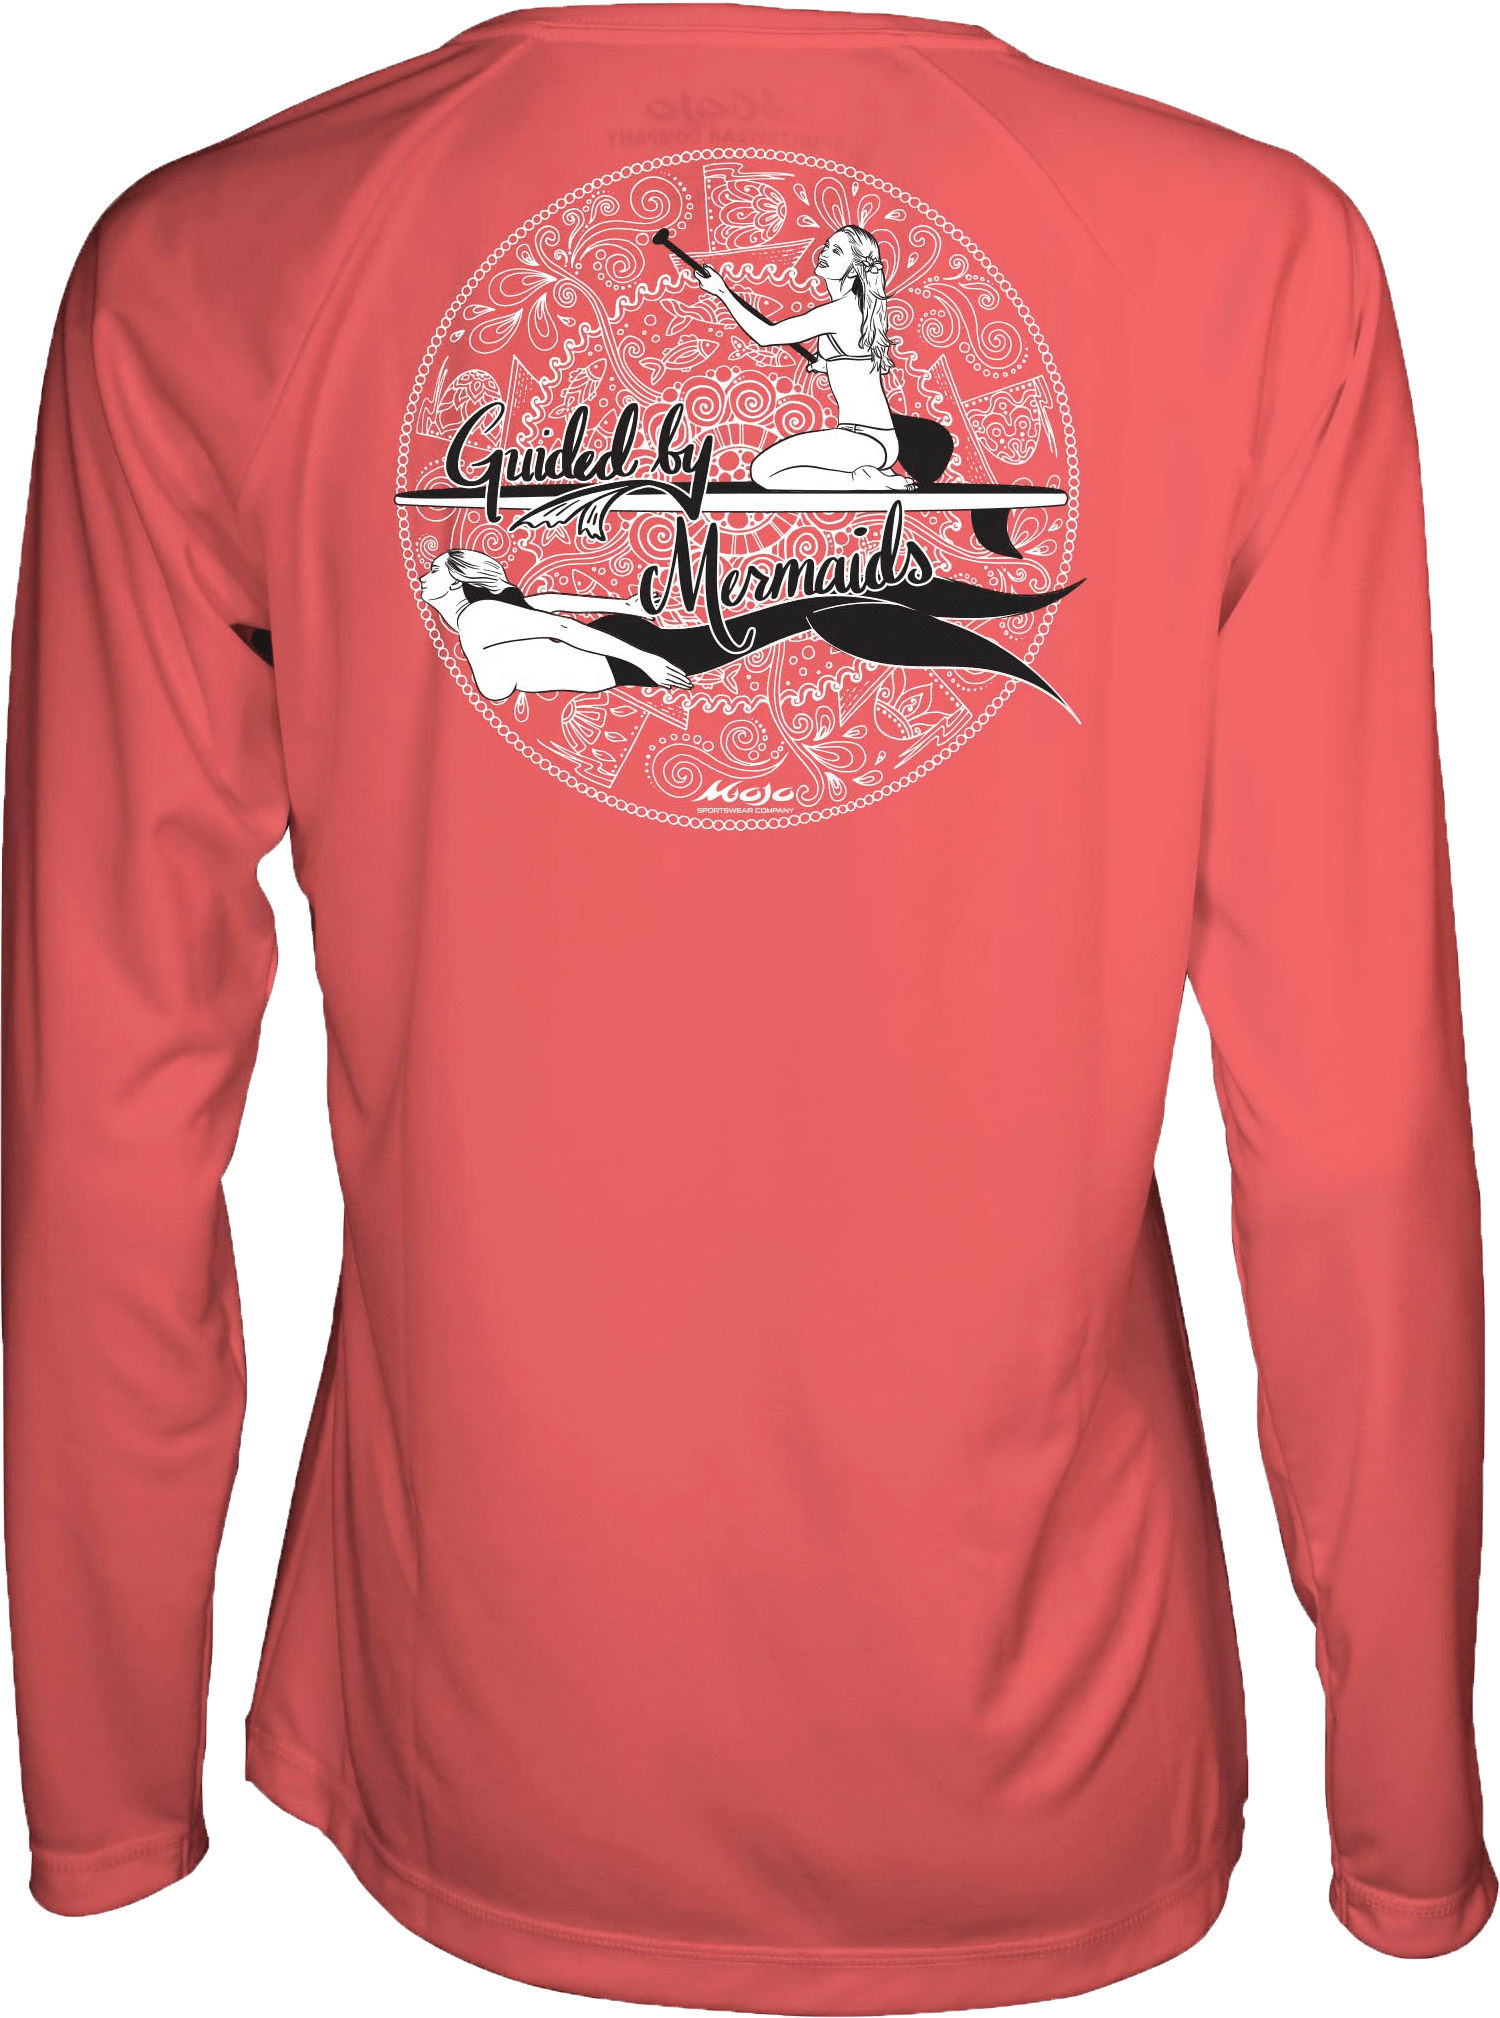 Mojo Sportswear Company Shirts Squid Teaser / S Guided by Mermaids V-Neck Wireman